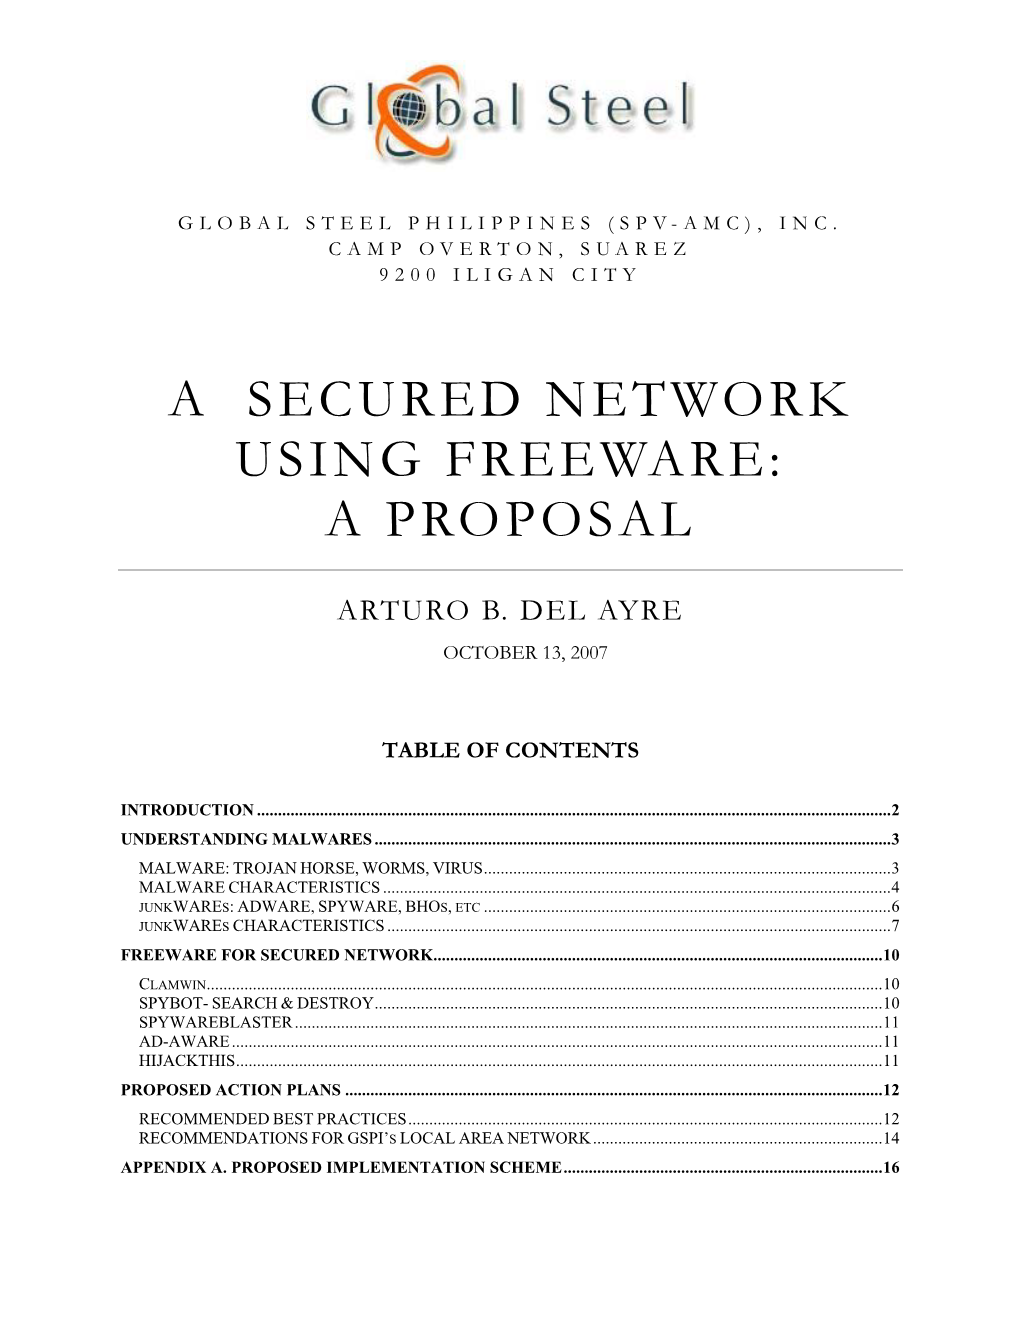 A Secured Network Using Freeware: a Proposal